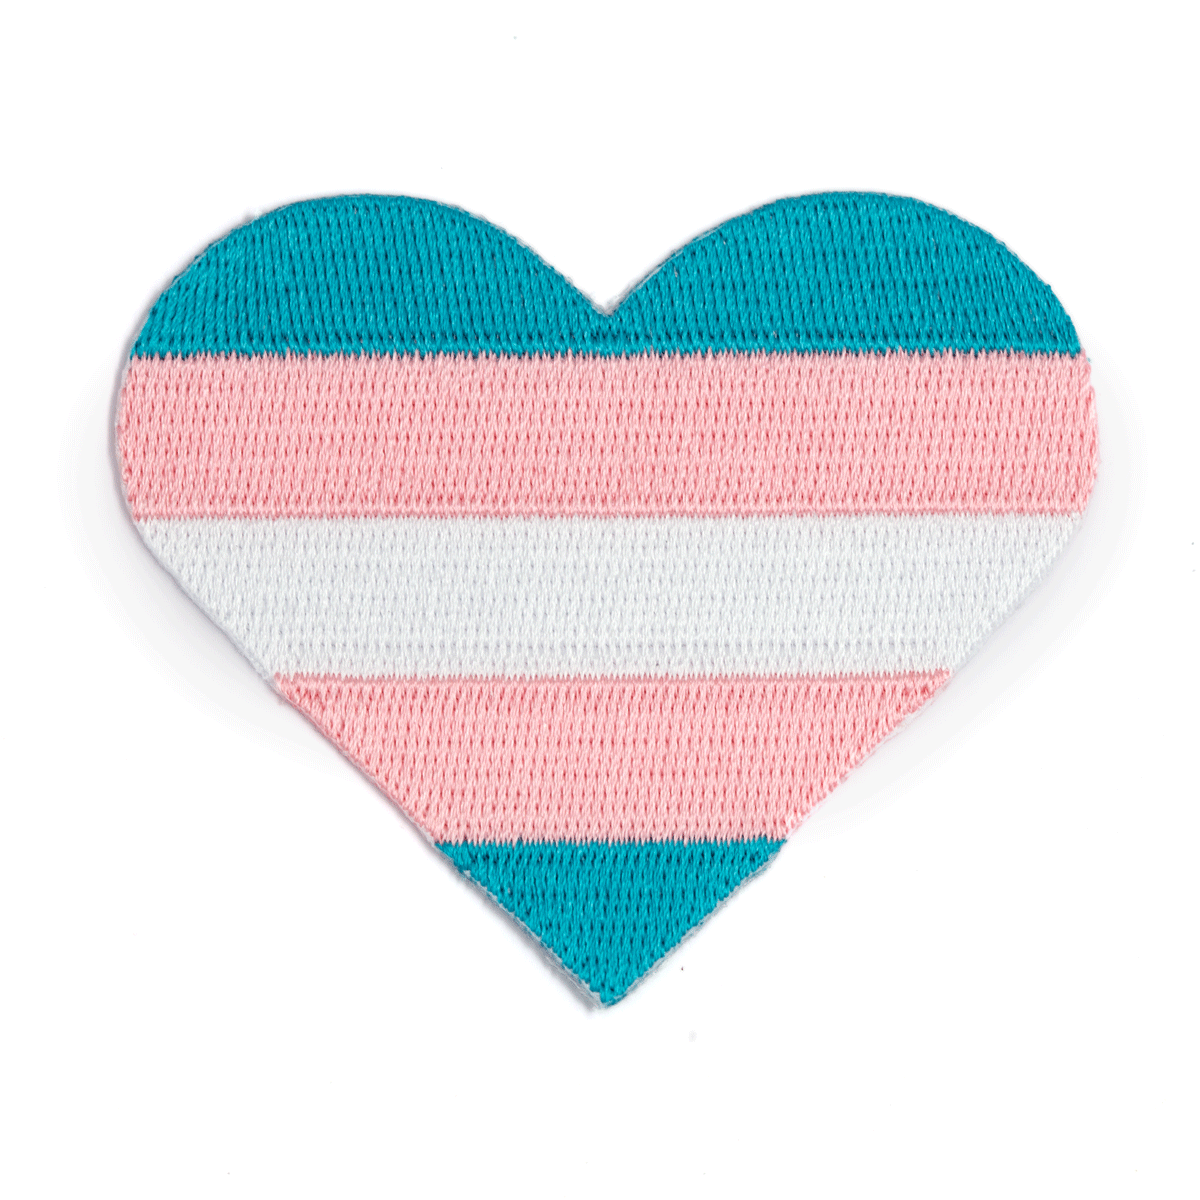 Trans Pride light blue, pink, and white stripes heart-shaped embroidered patch